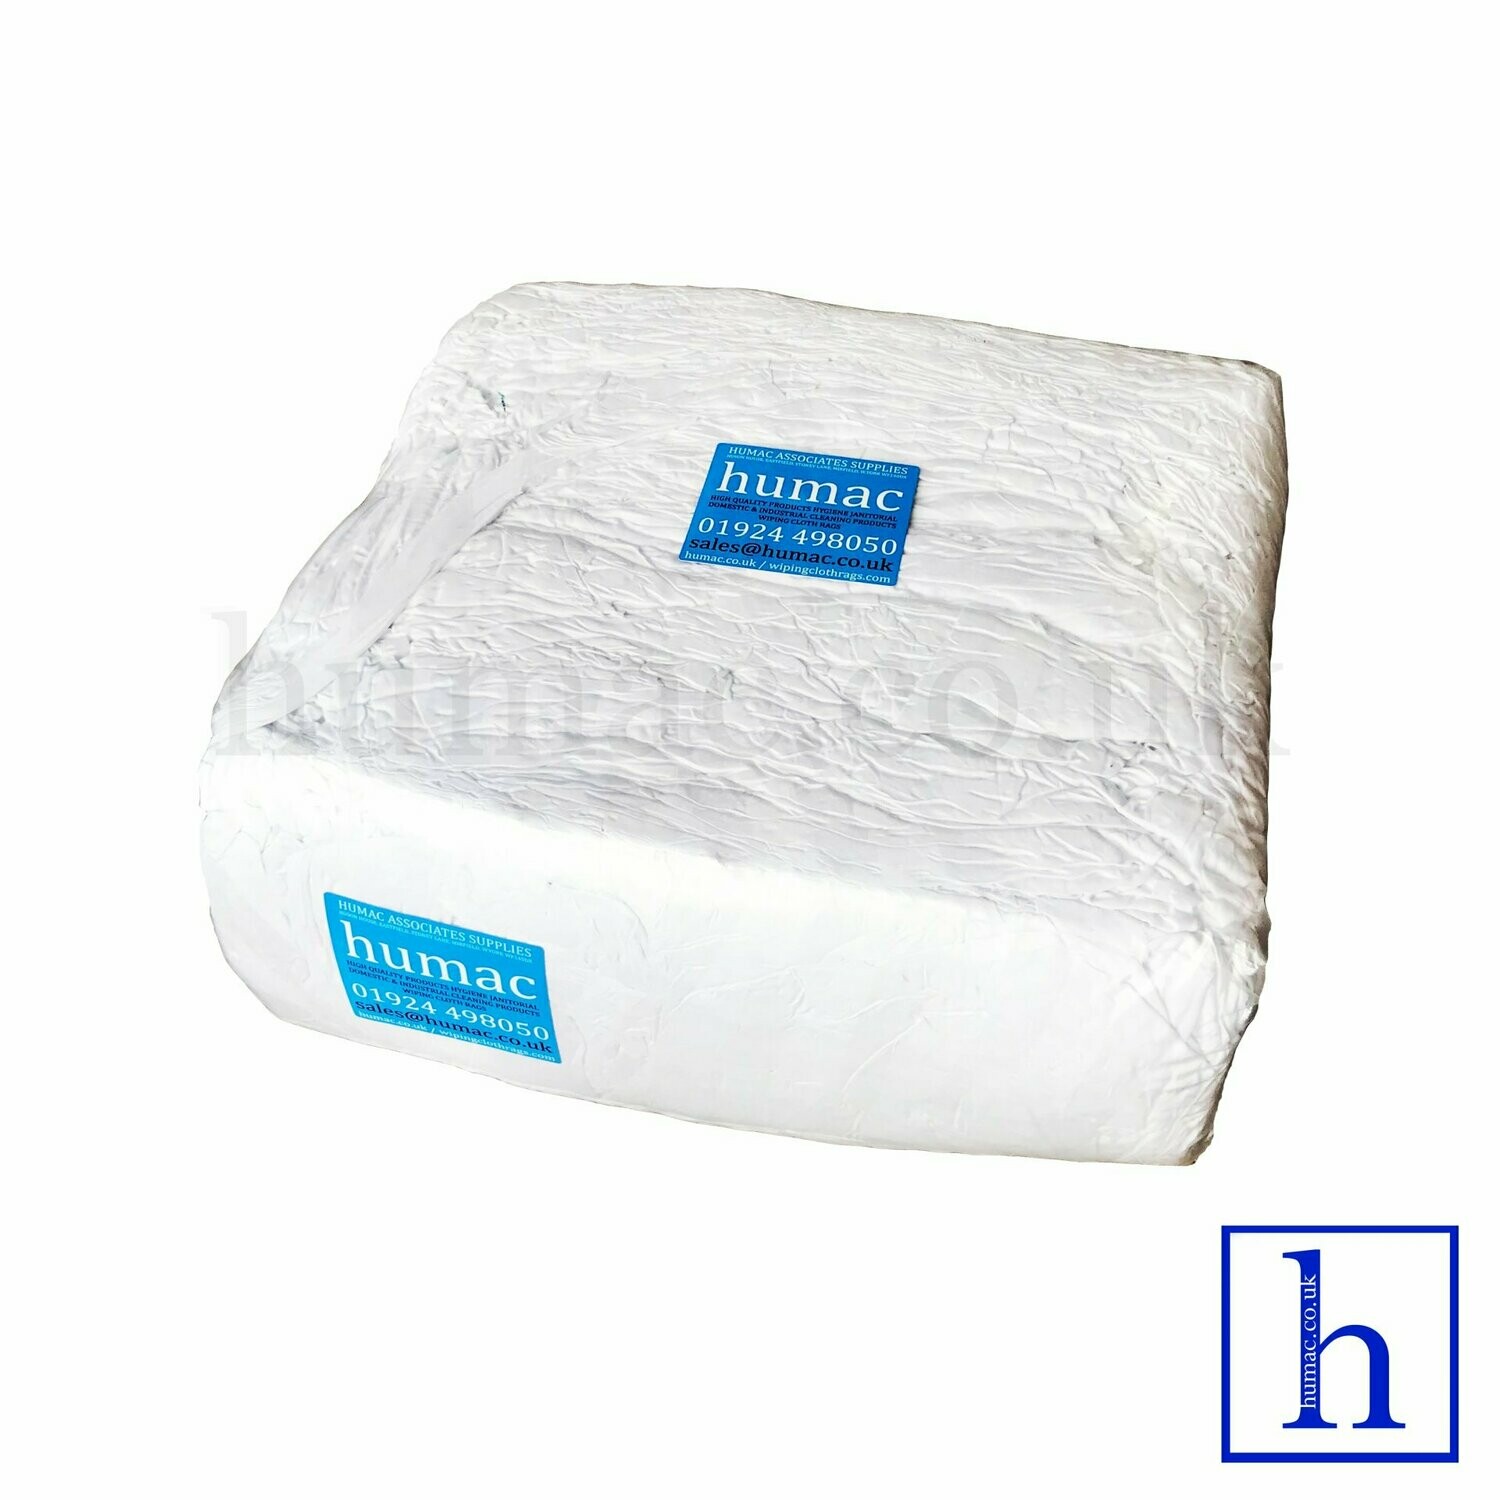 10KG WHITE LINT FREE SHEETING - WIPING CLOTH RAGS - OLS